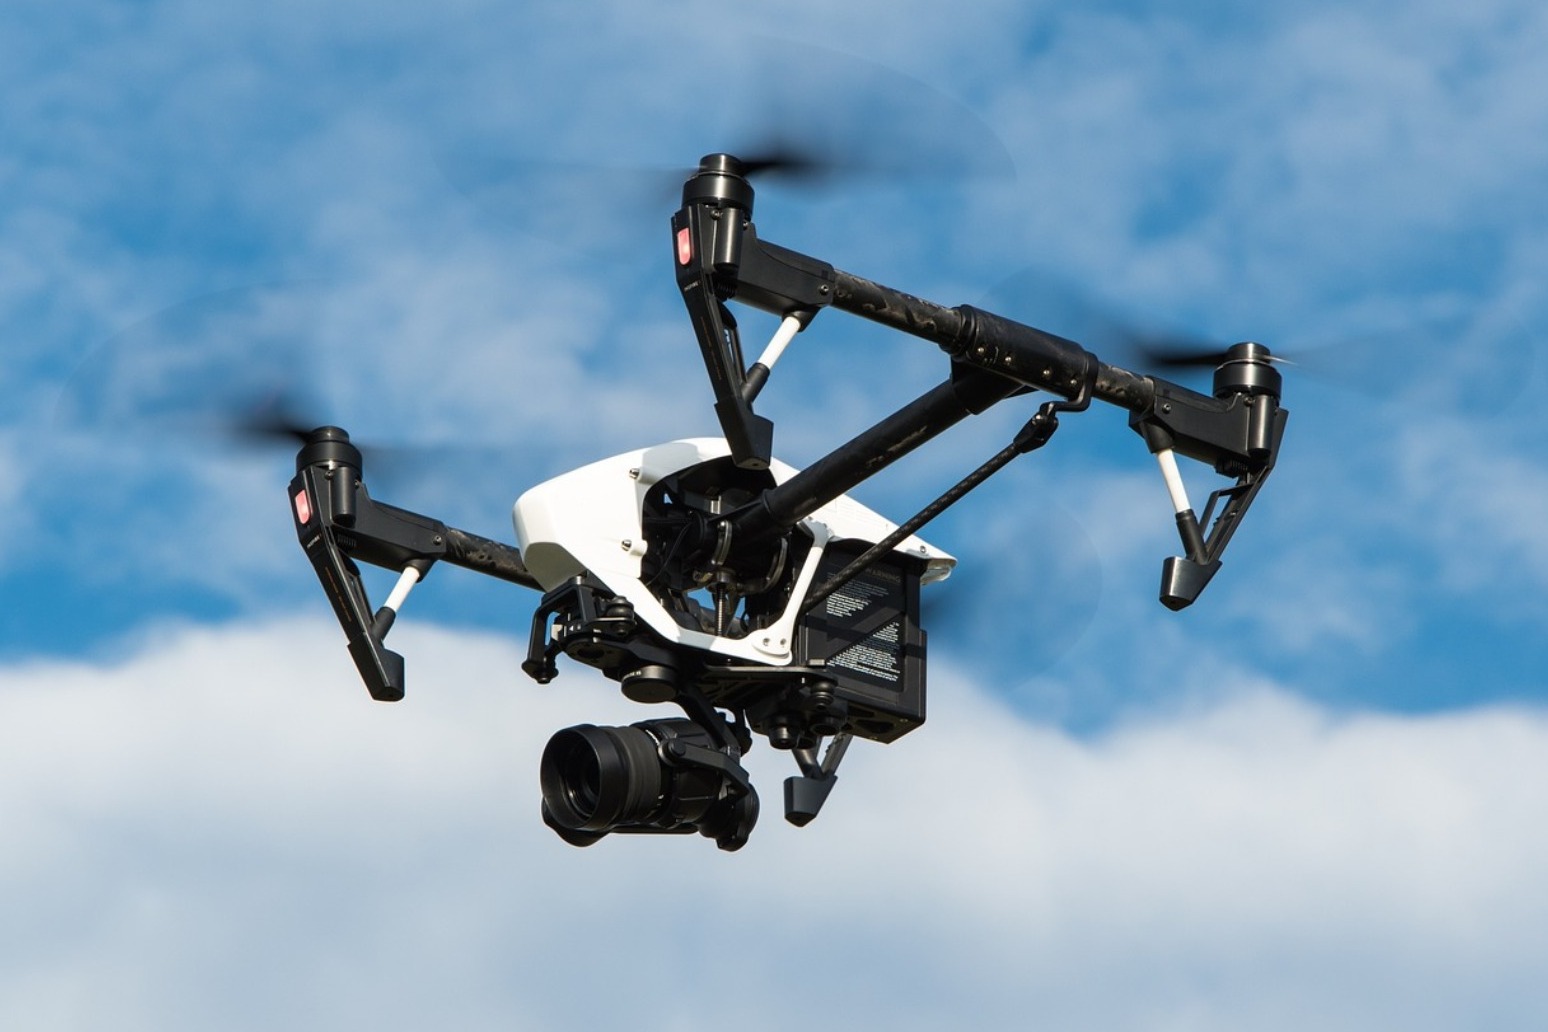 POLICE TO BE GIVEN POWERS TO COMBAT ILLEGAL USE OF DRONES 